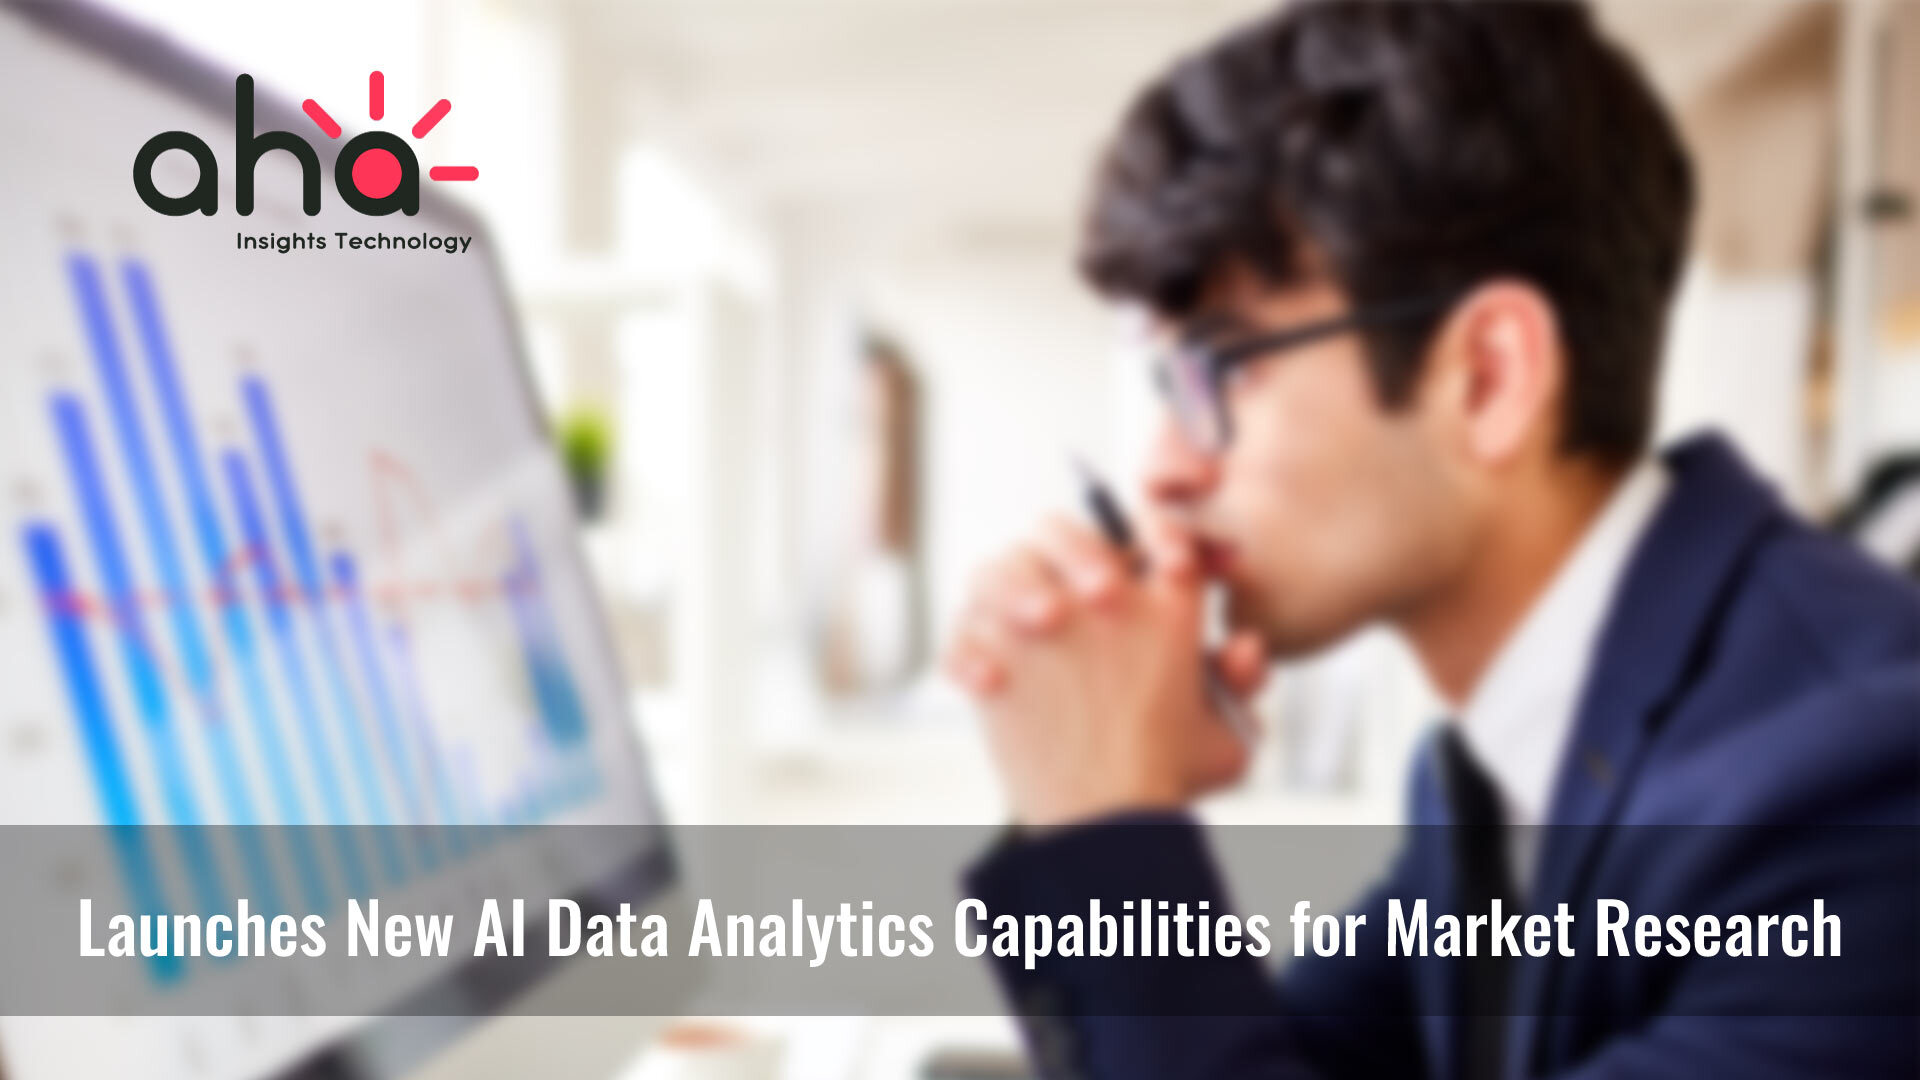 Aha Insights Technology Launches New AI Data Analytics Capabilities for Market Research